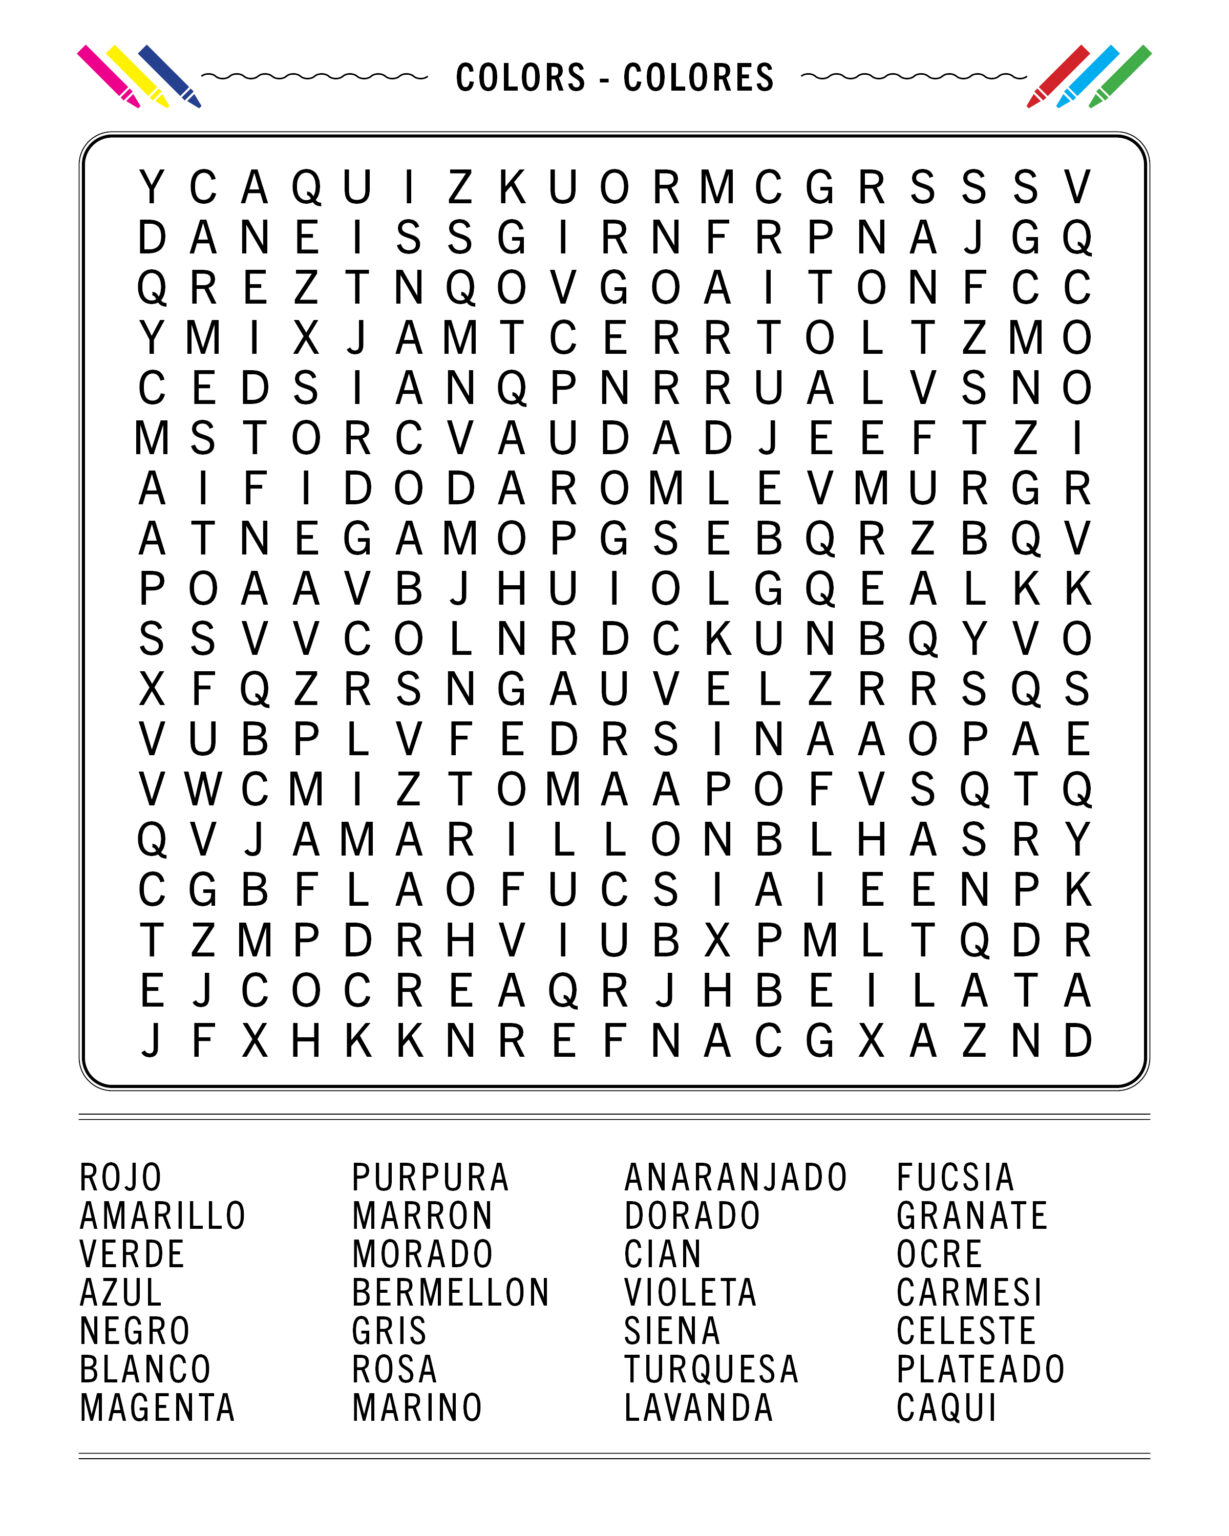 Spanish Colors Word Search Free Printable to Learn the Colors